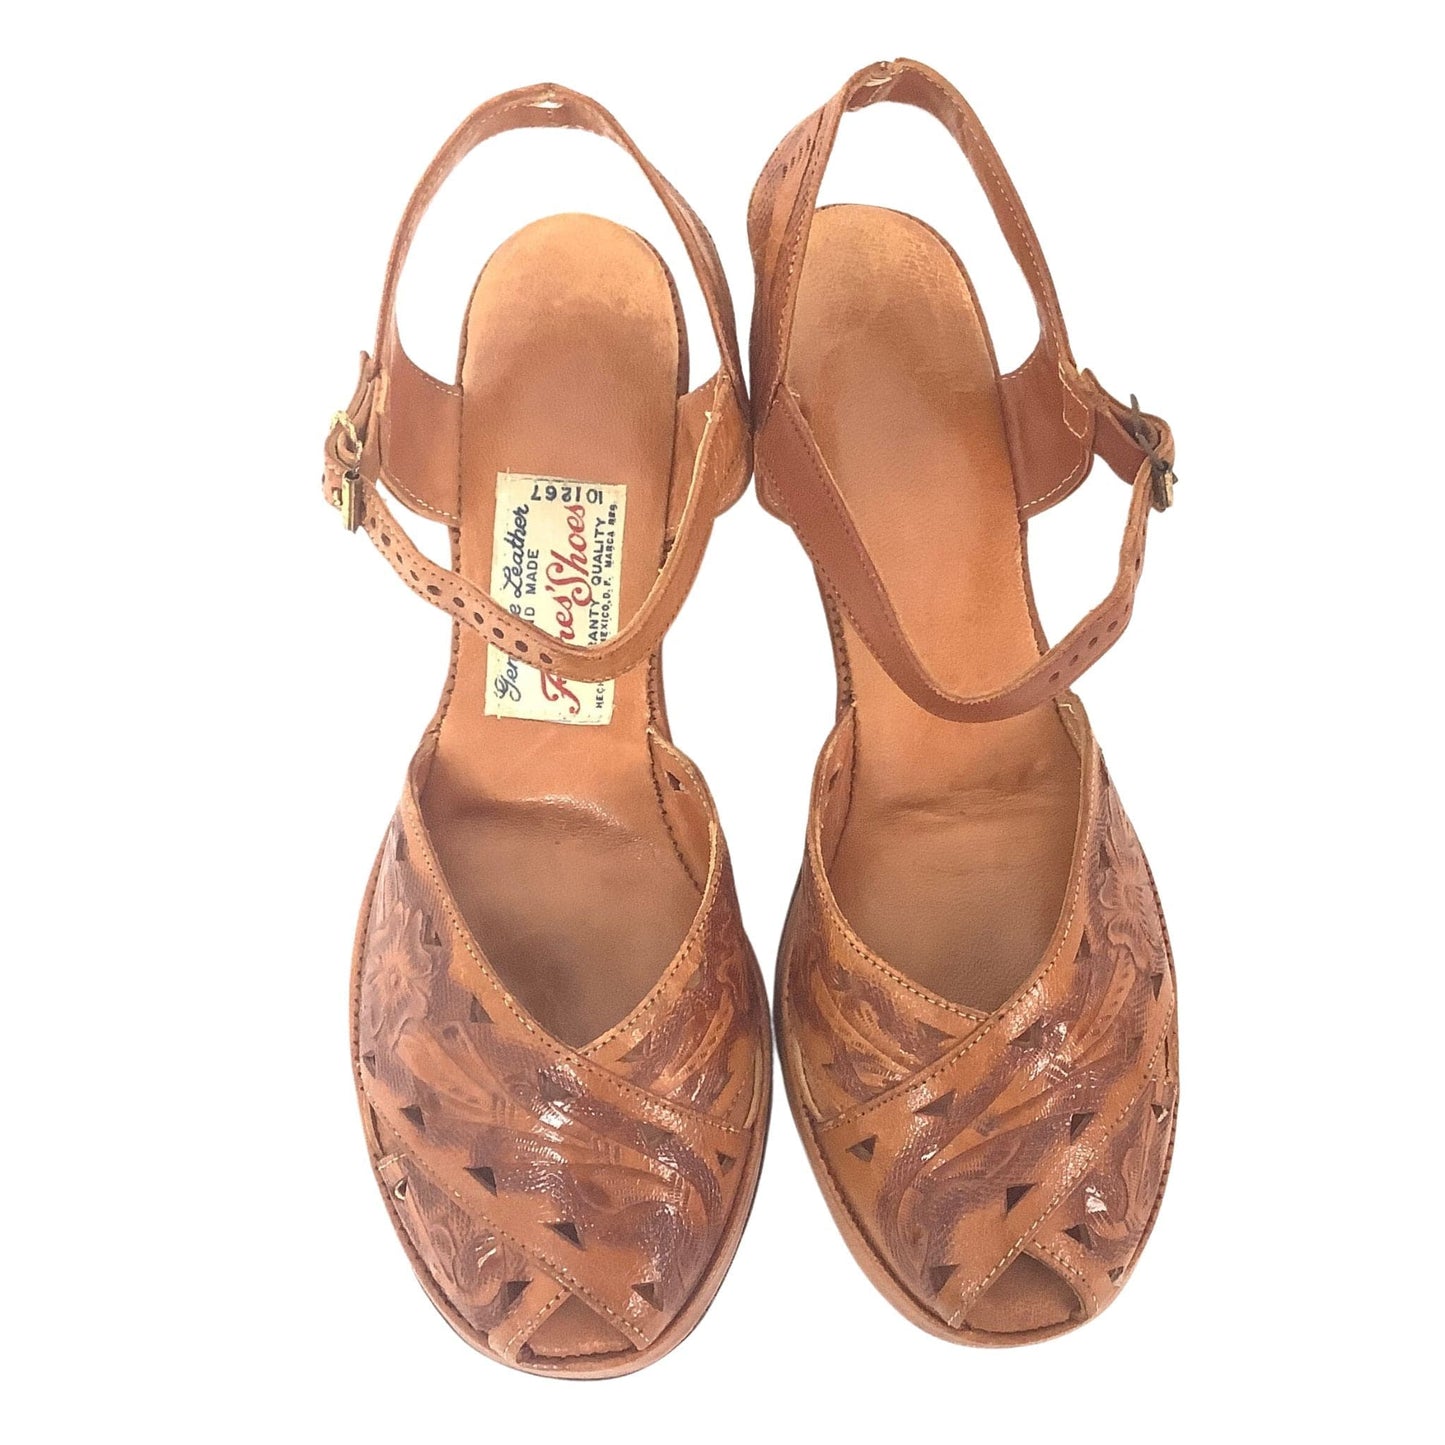 1930s Tooled Leather Sandals 6.5 / Tan / Vintage 1930s